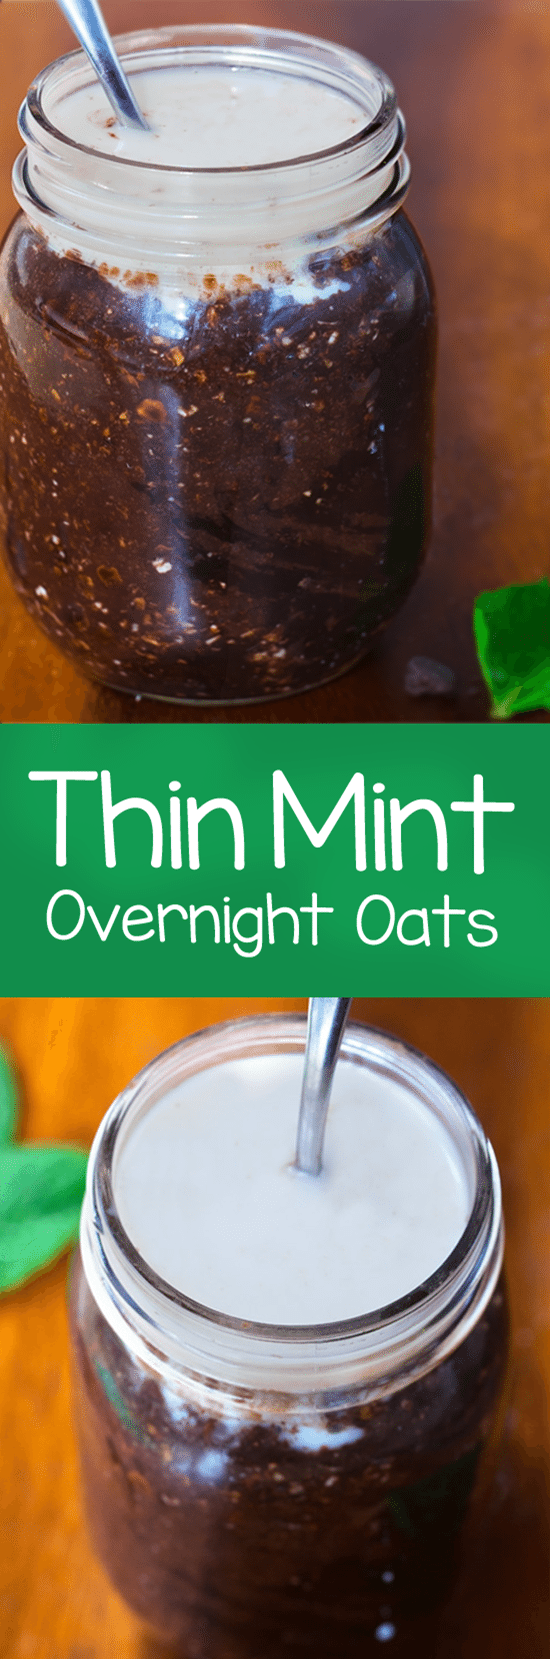 If you love Girl Scout cookies, these overnight oats were made with you in mind.